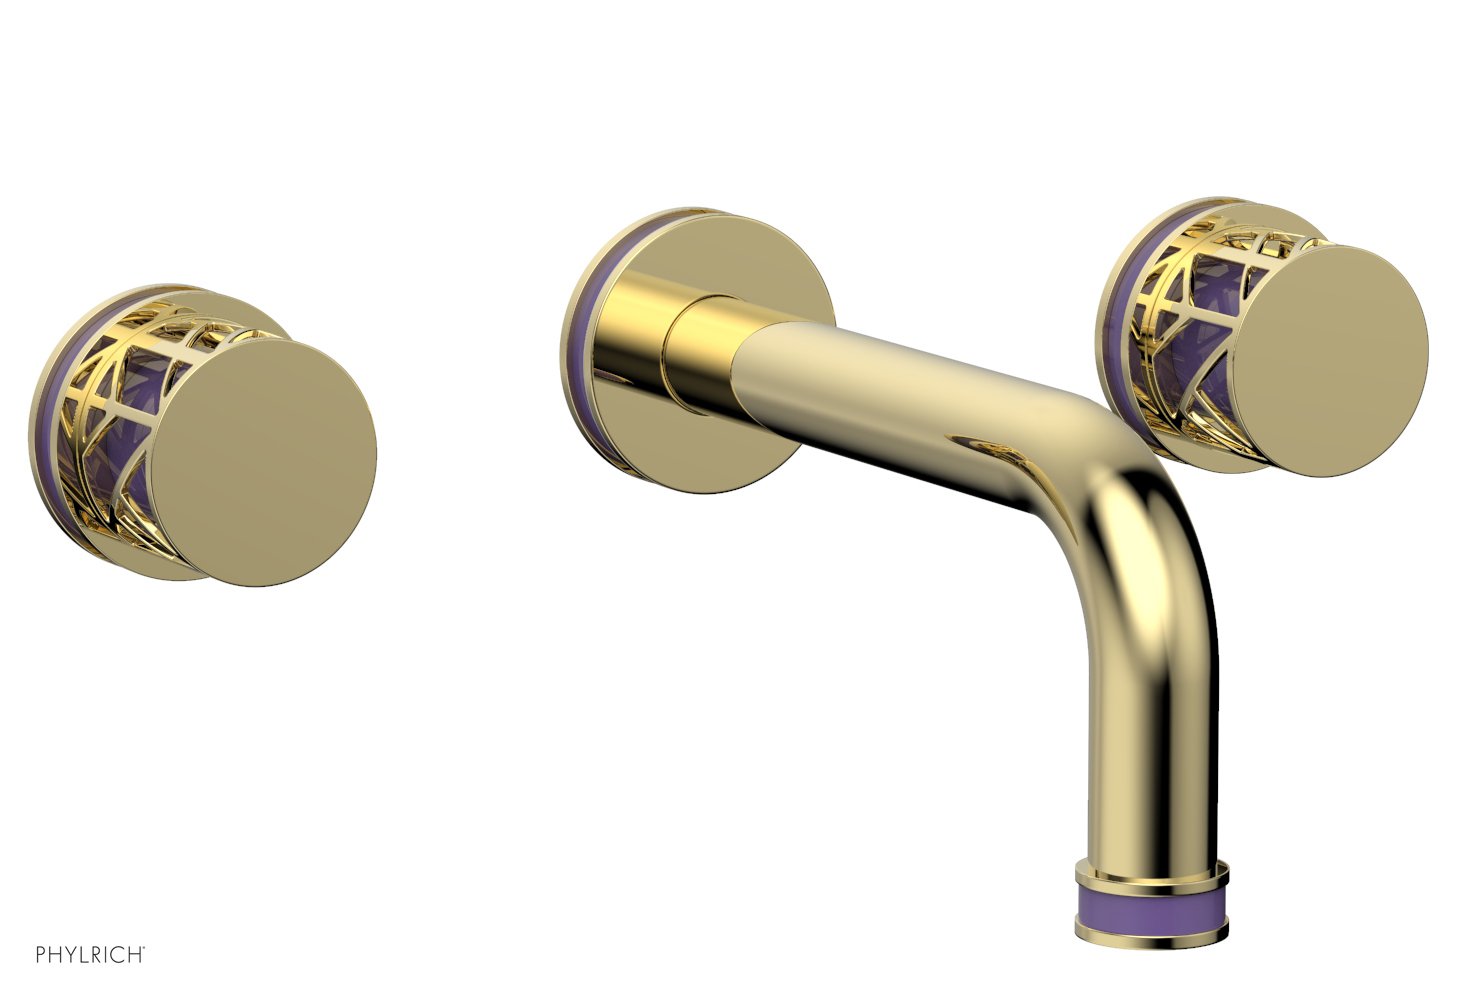 Phylrich JOLIE Wall Lavatory Set - Round Handles with "Purple" Accents